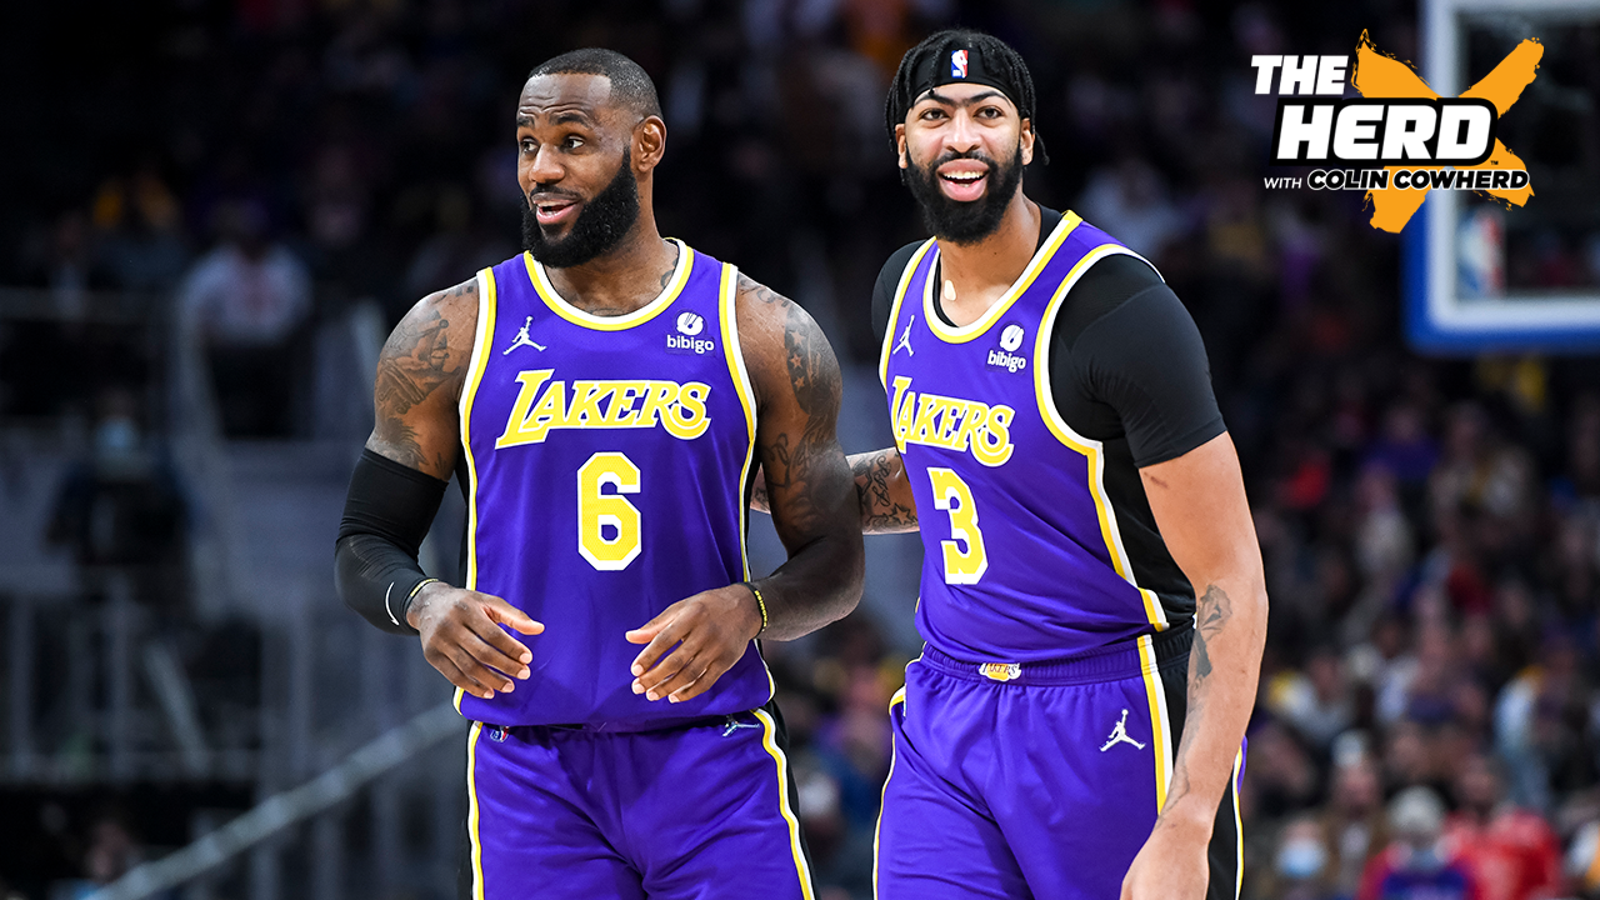 How far can LeBron James, Anthony Davis & Lakers go in the playoffs?